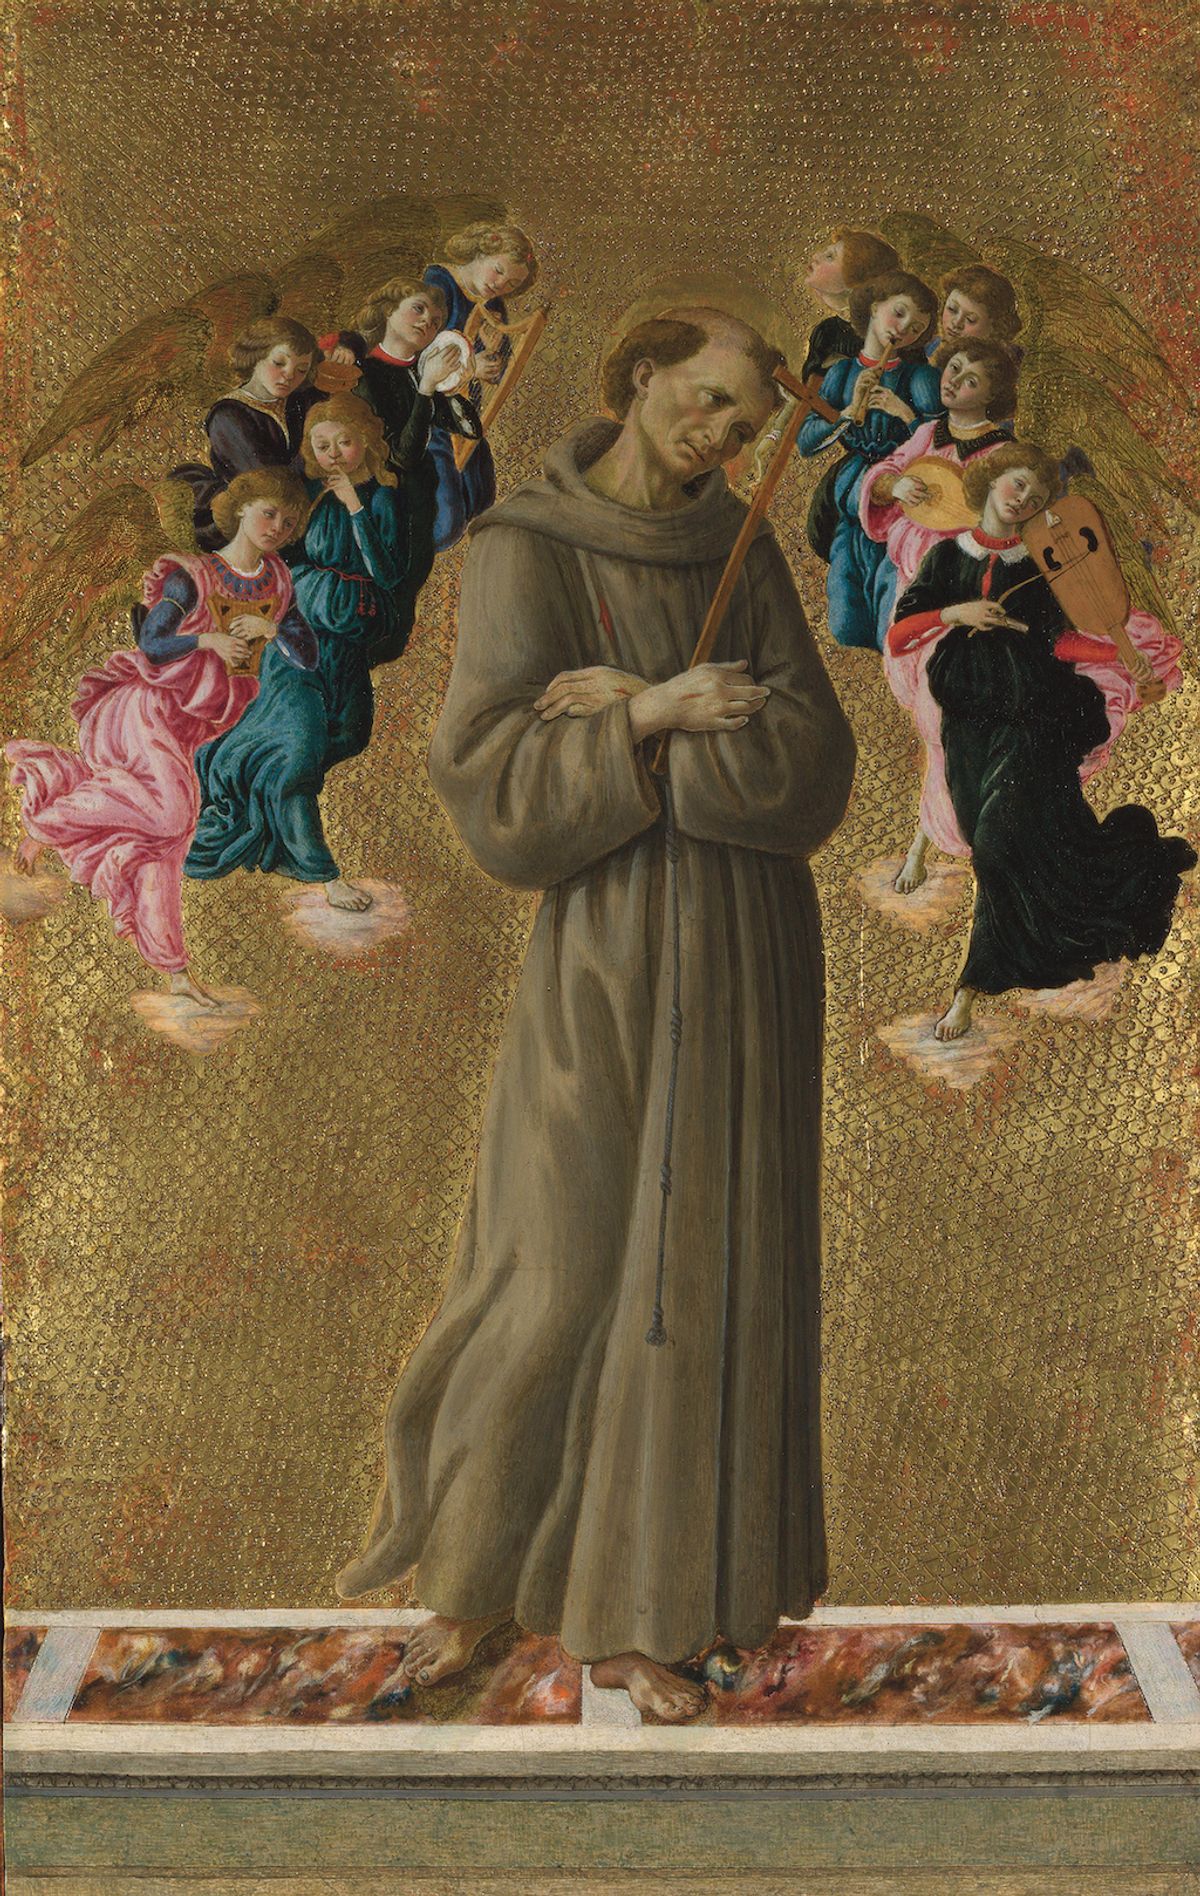 The National Gallery show includes Sandro Botticelli’s Saint Francis of Assisi with Angels (1475-80) © The National Gallery, London


